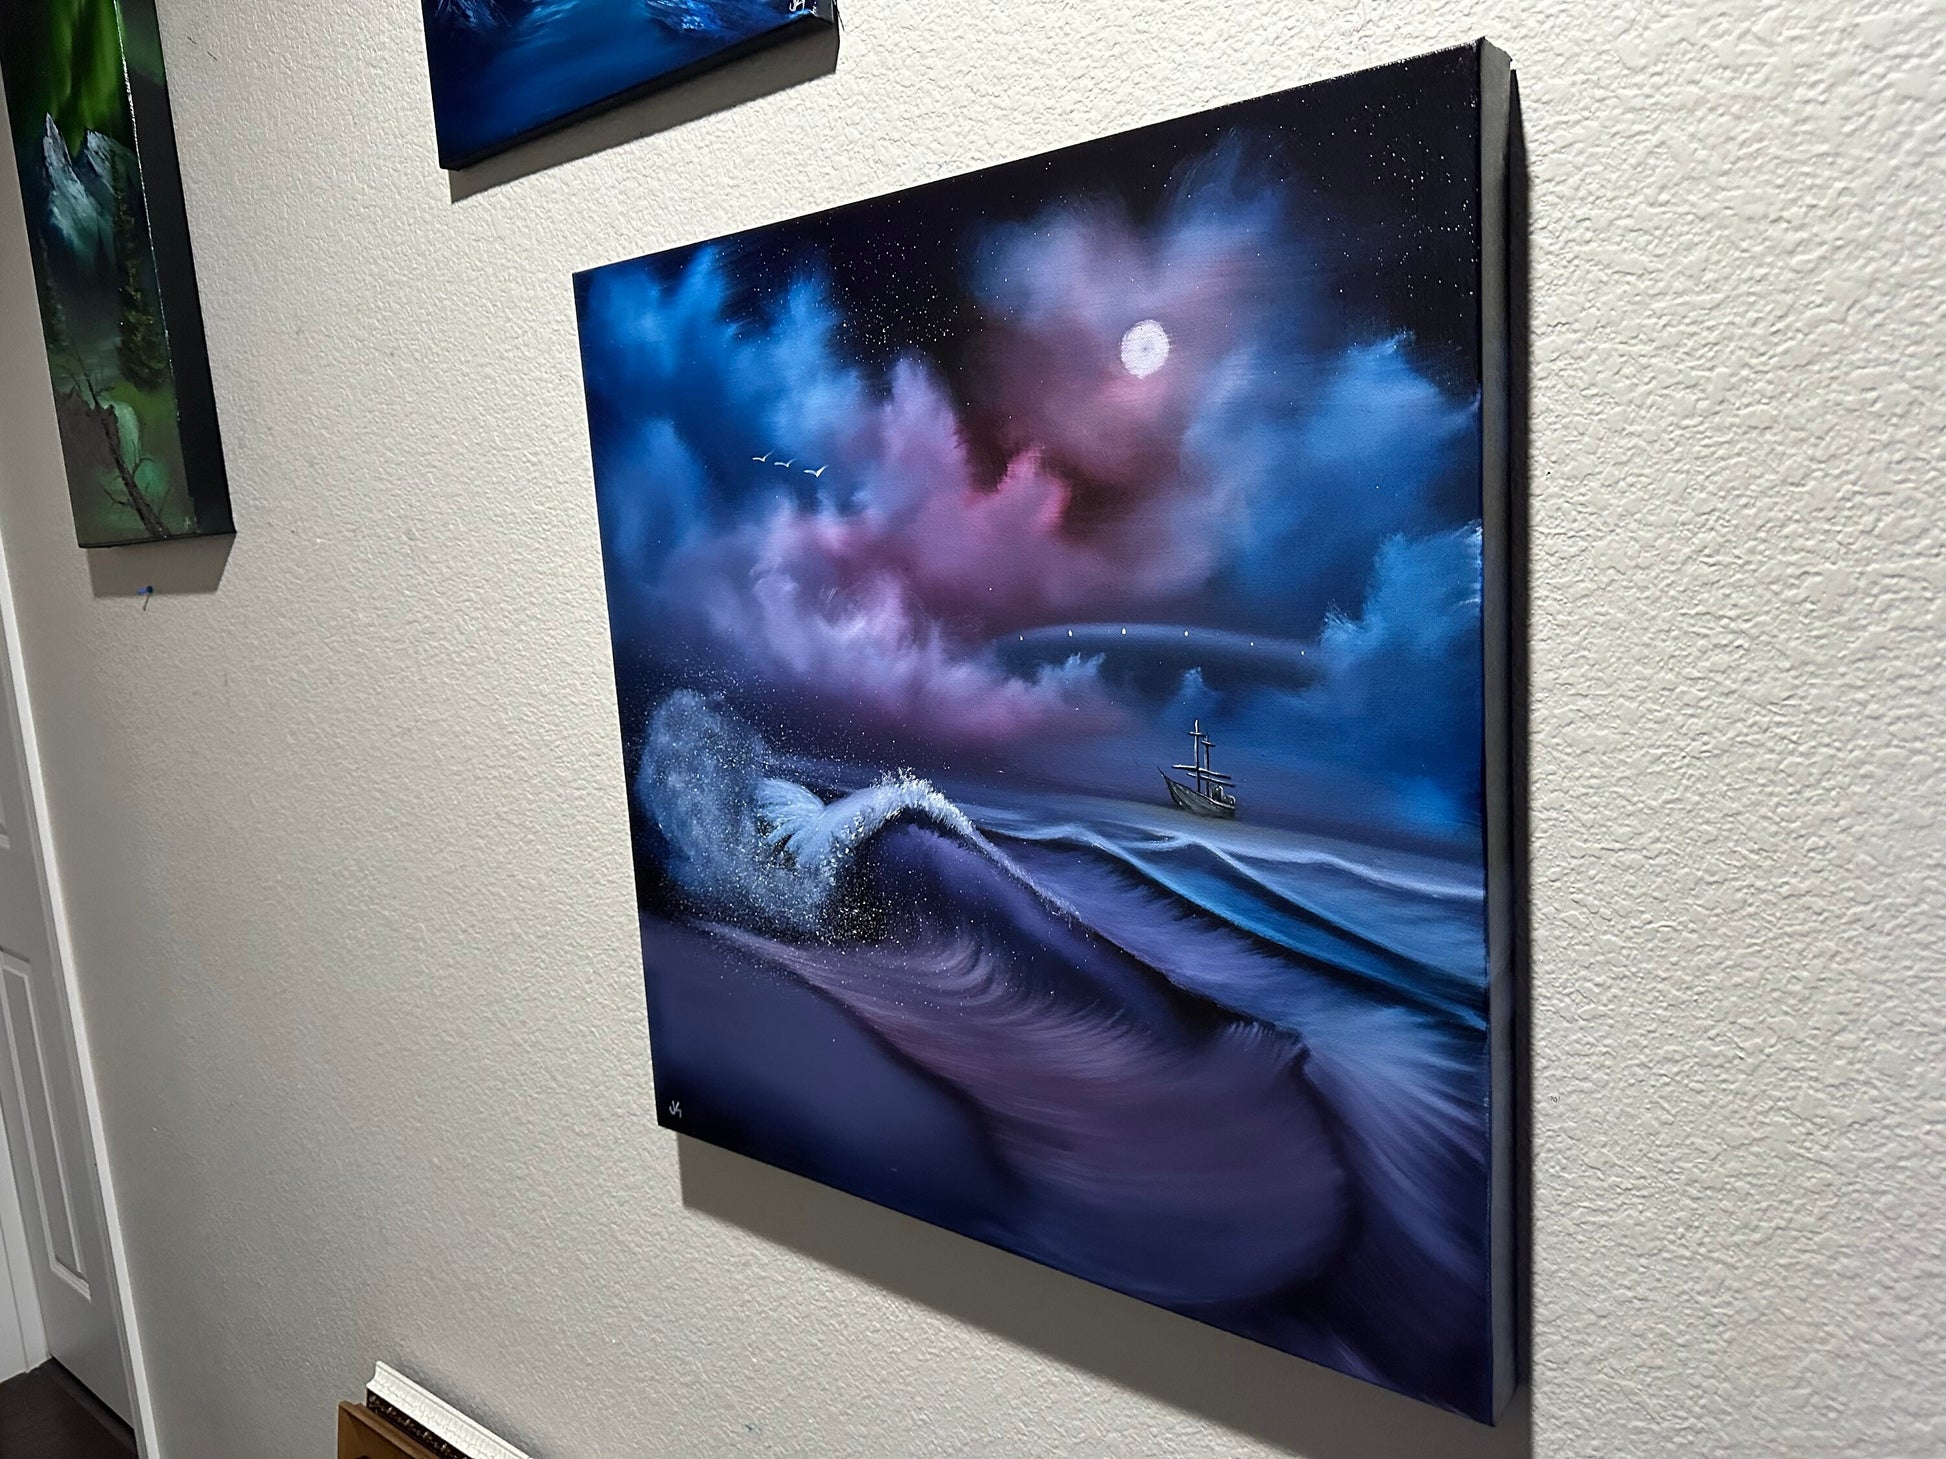 Painting 967 - 24x24" Pro Series Canvas Blue / Purple Seascape with Ghost Ship and UFO painted Live on TikTok - 9/30/23 by PaintWithJosh